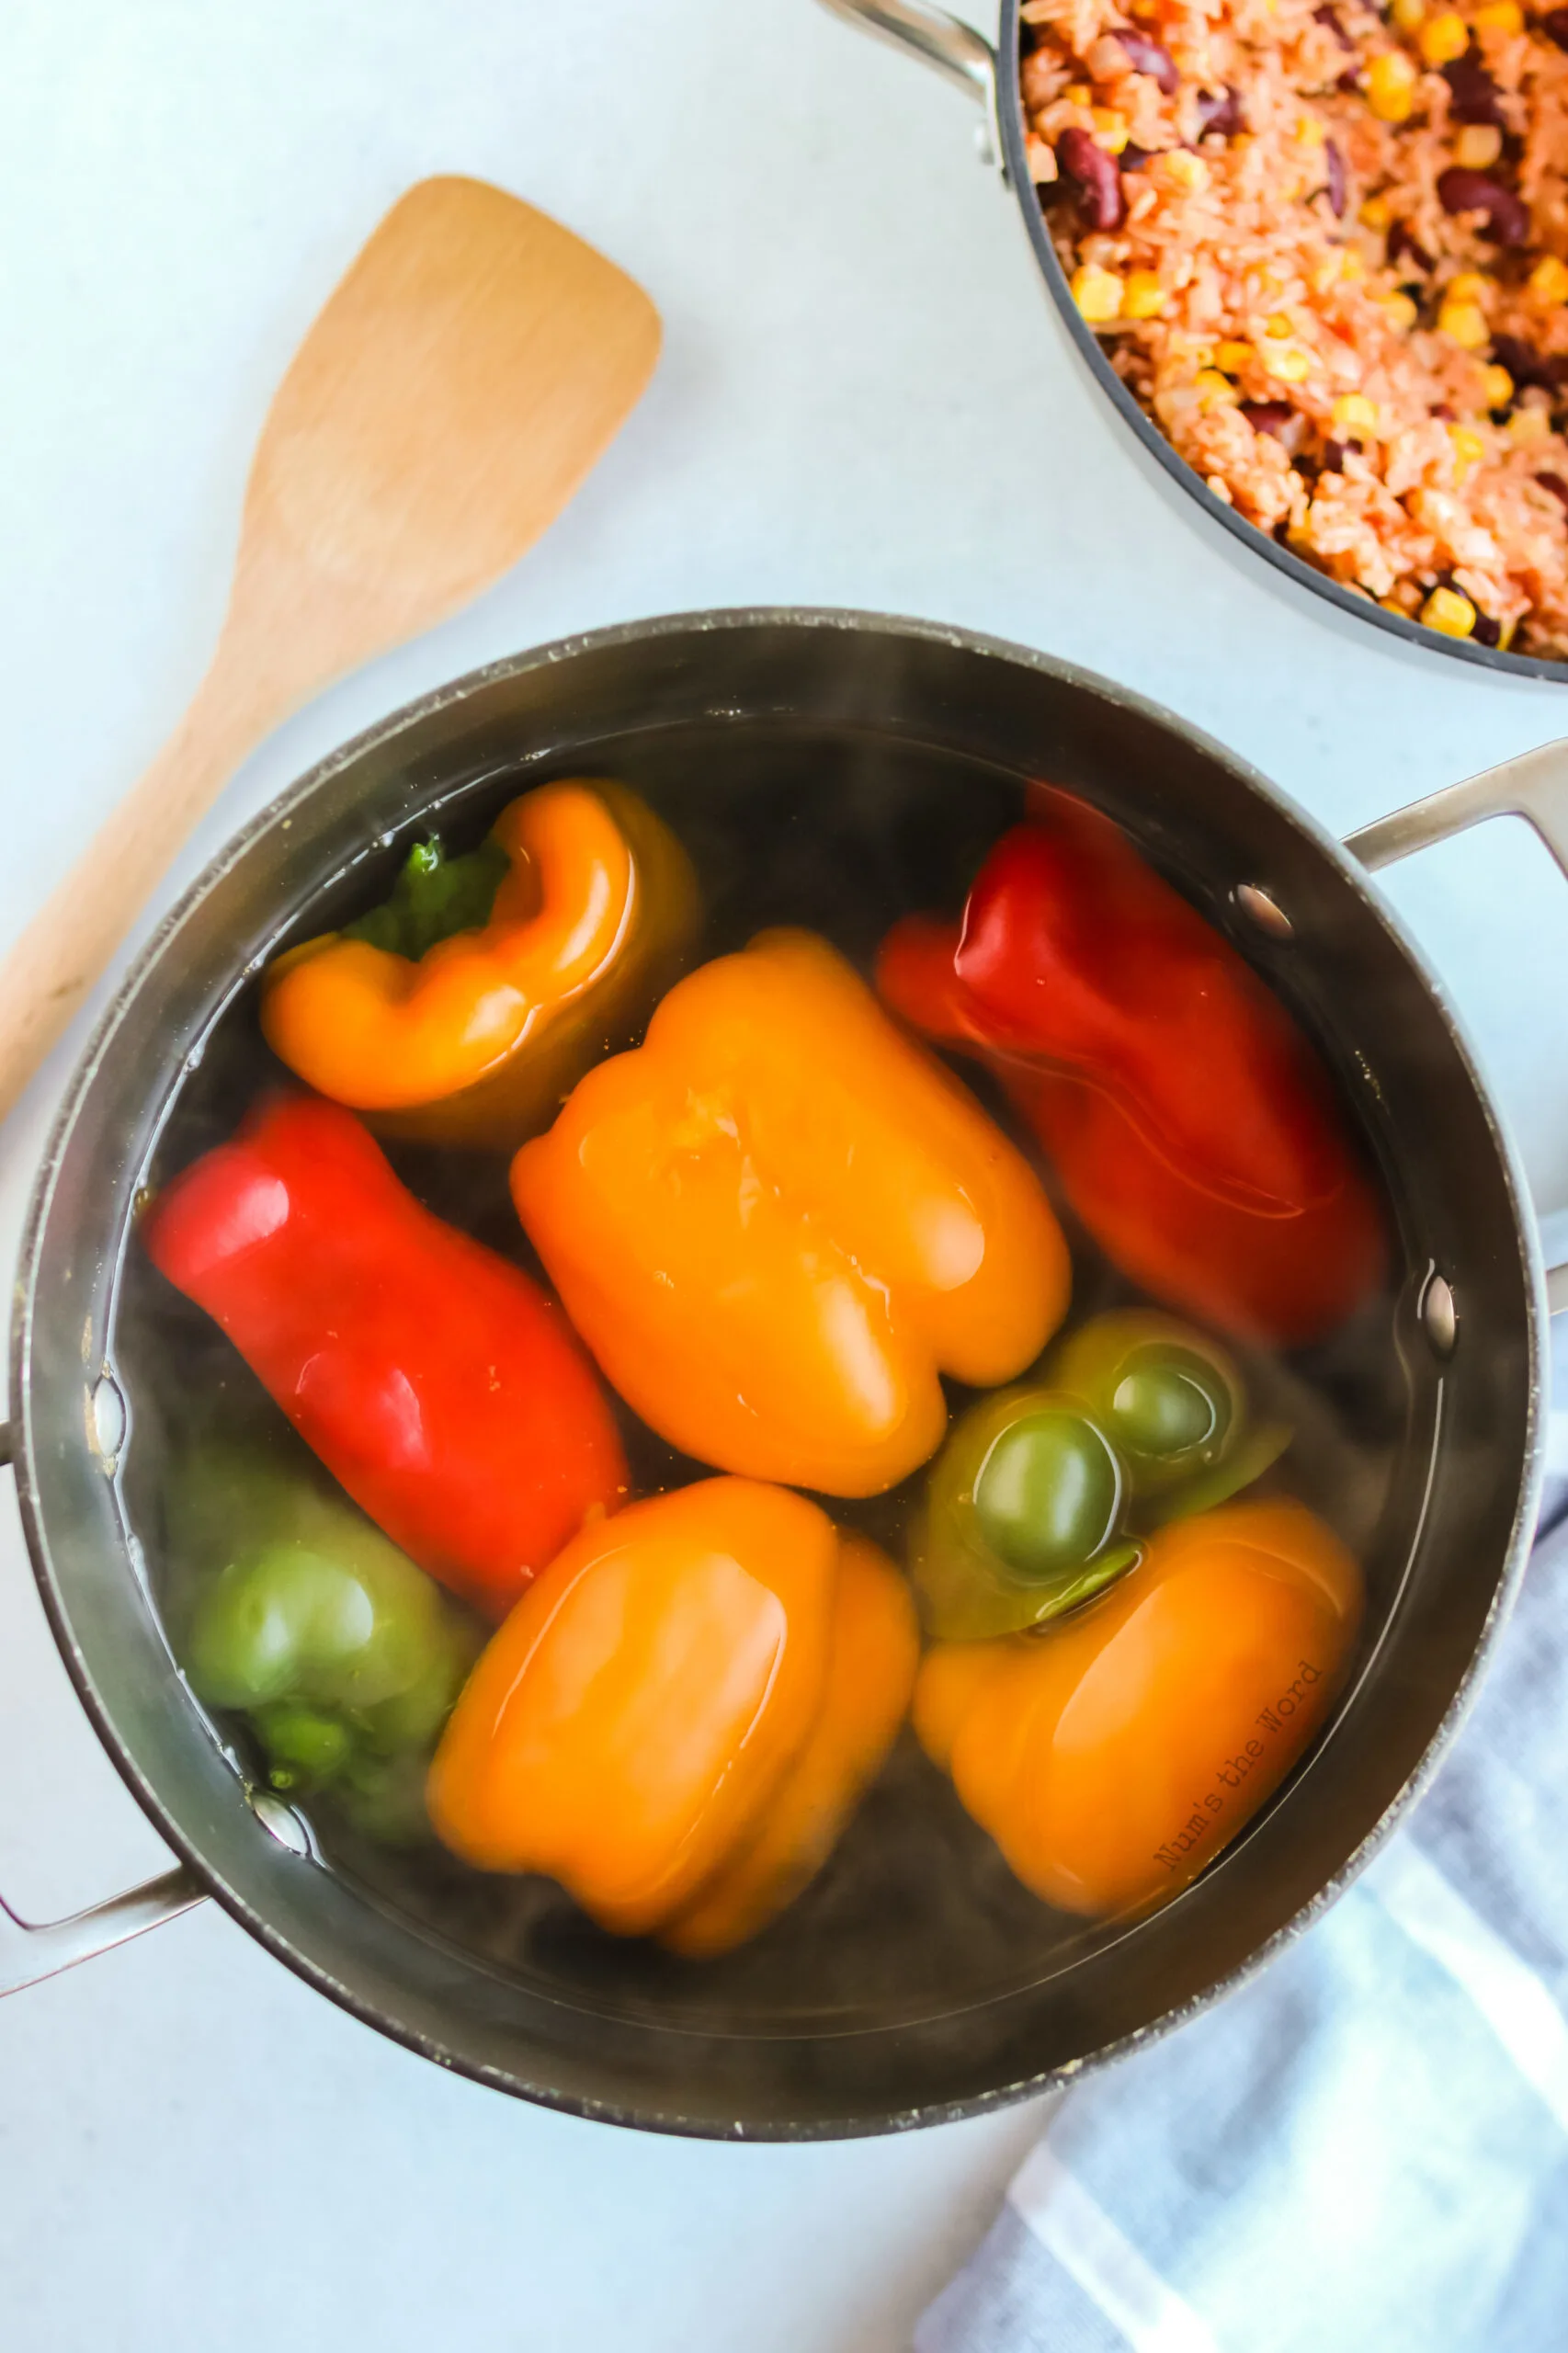 peppers cut in half and in a pot of boiling water.